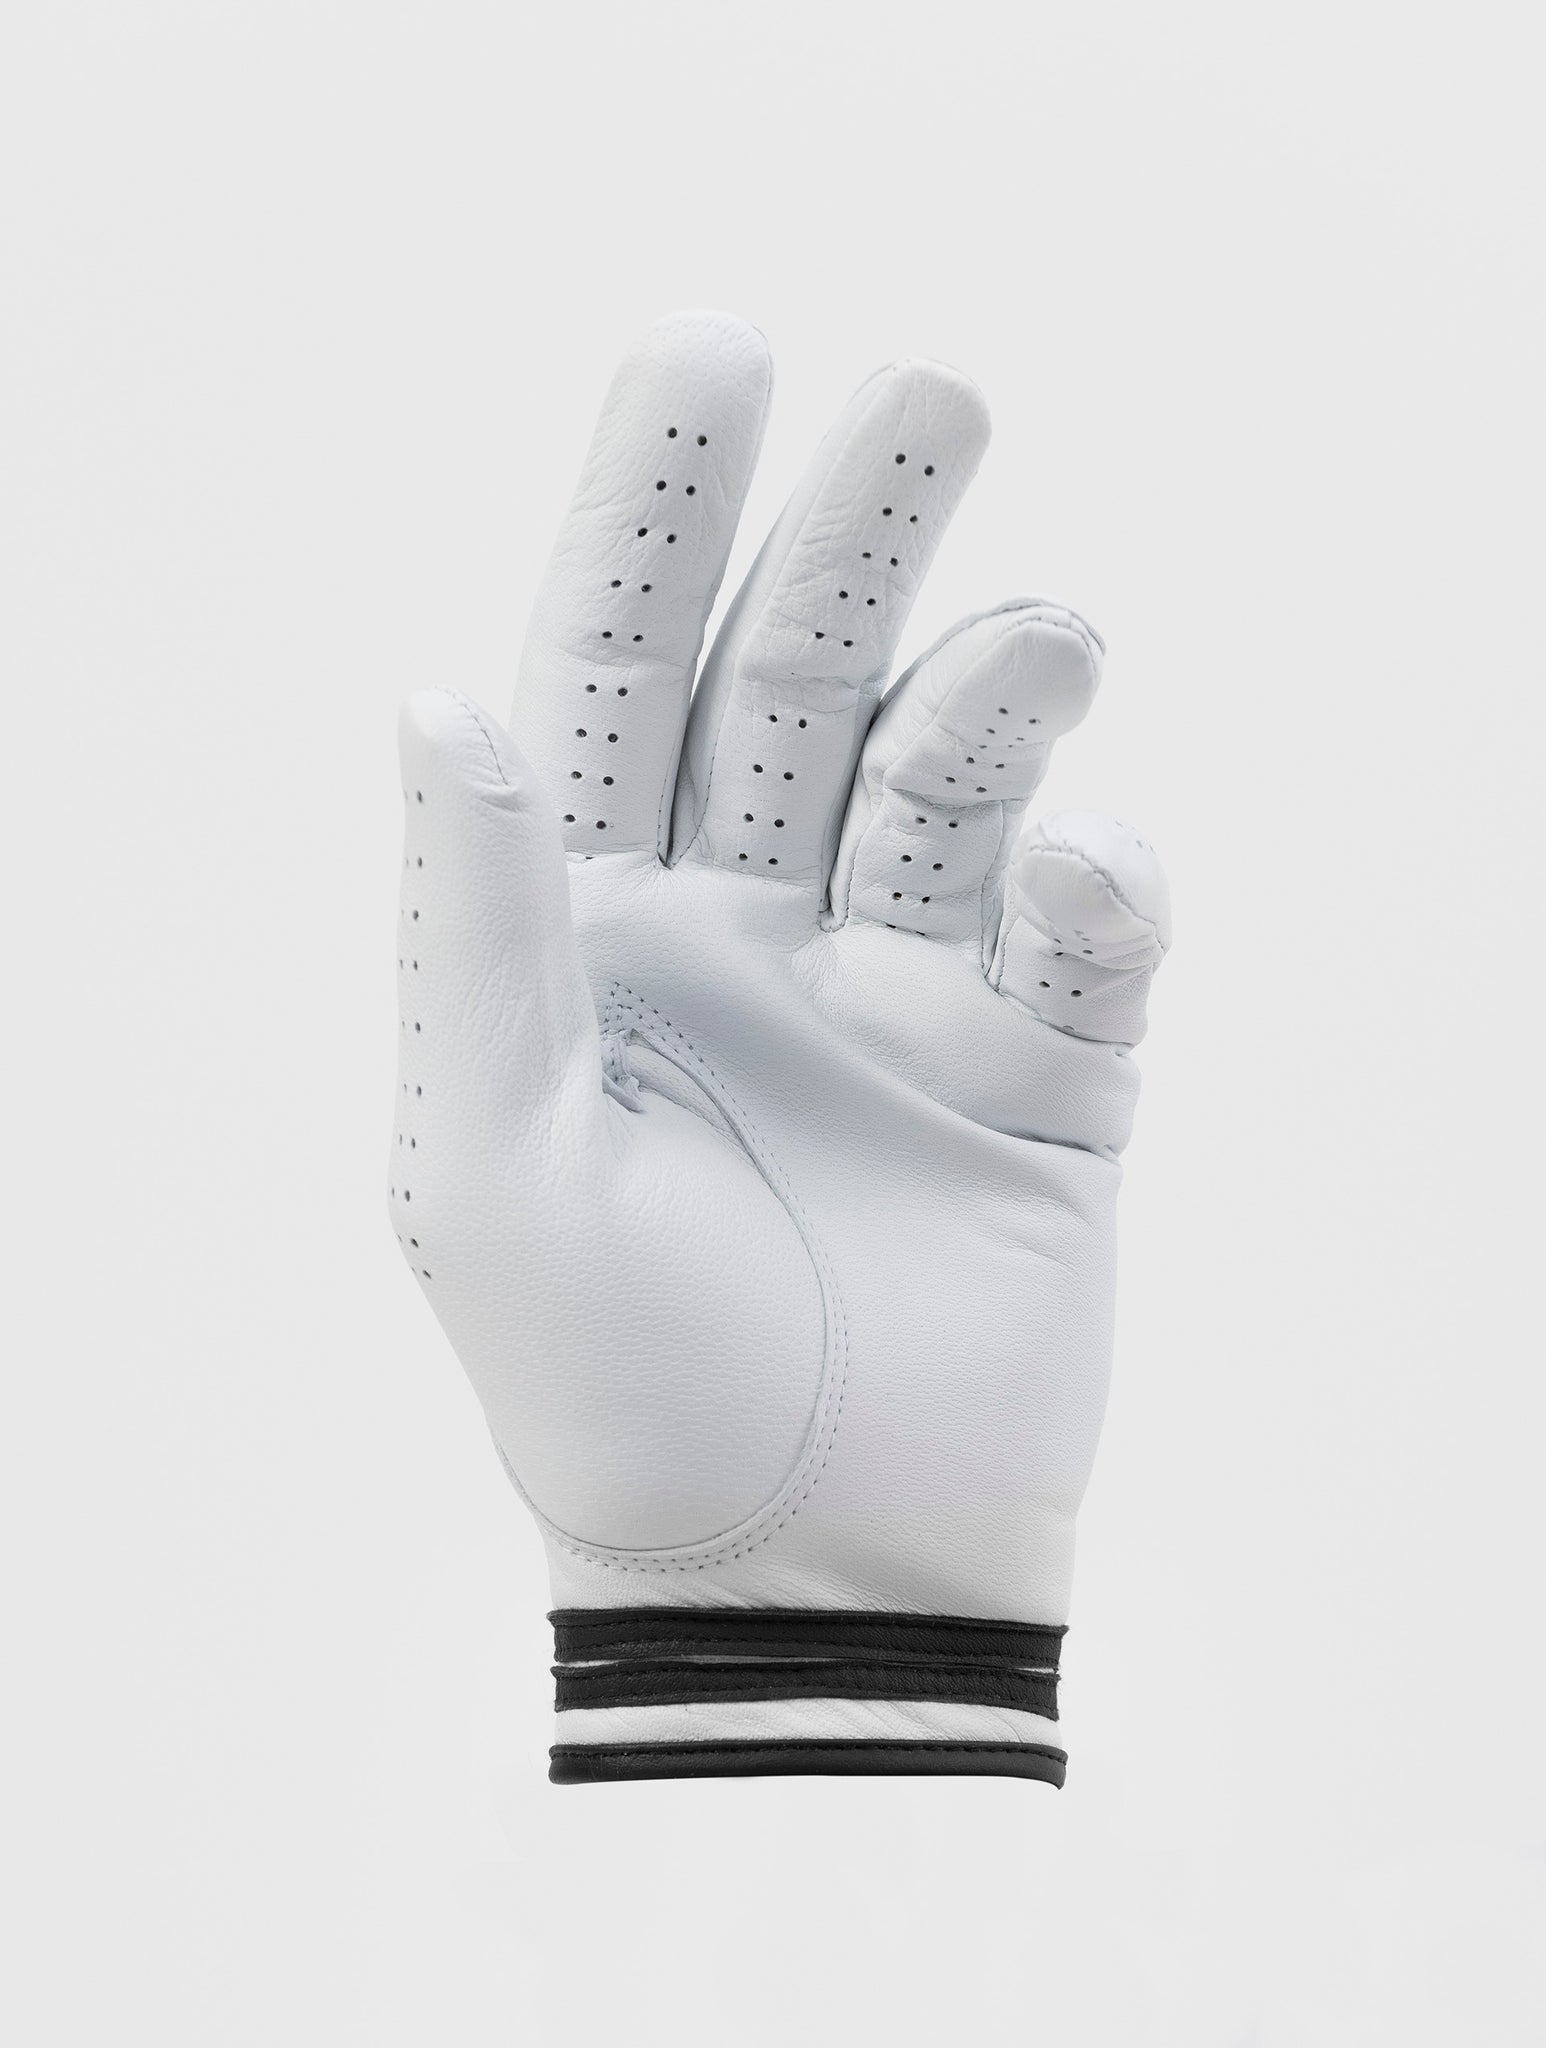 NOHOW GOLF LEFT GLOVE IN WHITE AND BLACK